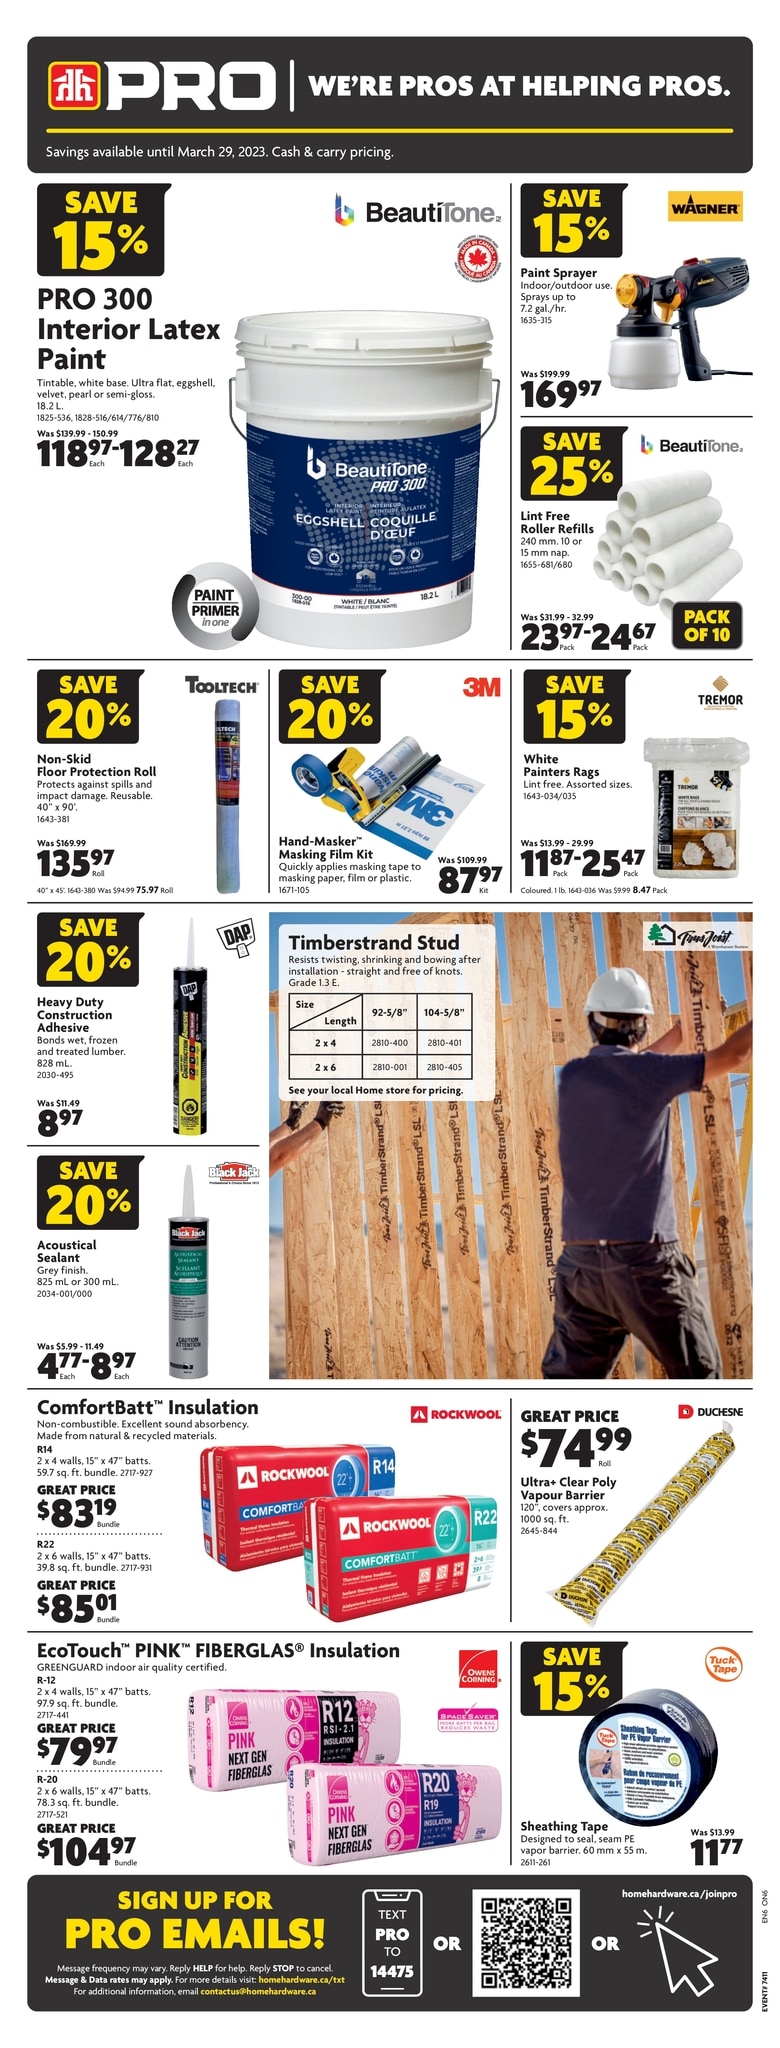 Home Hardware - PRO - Page 7